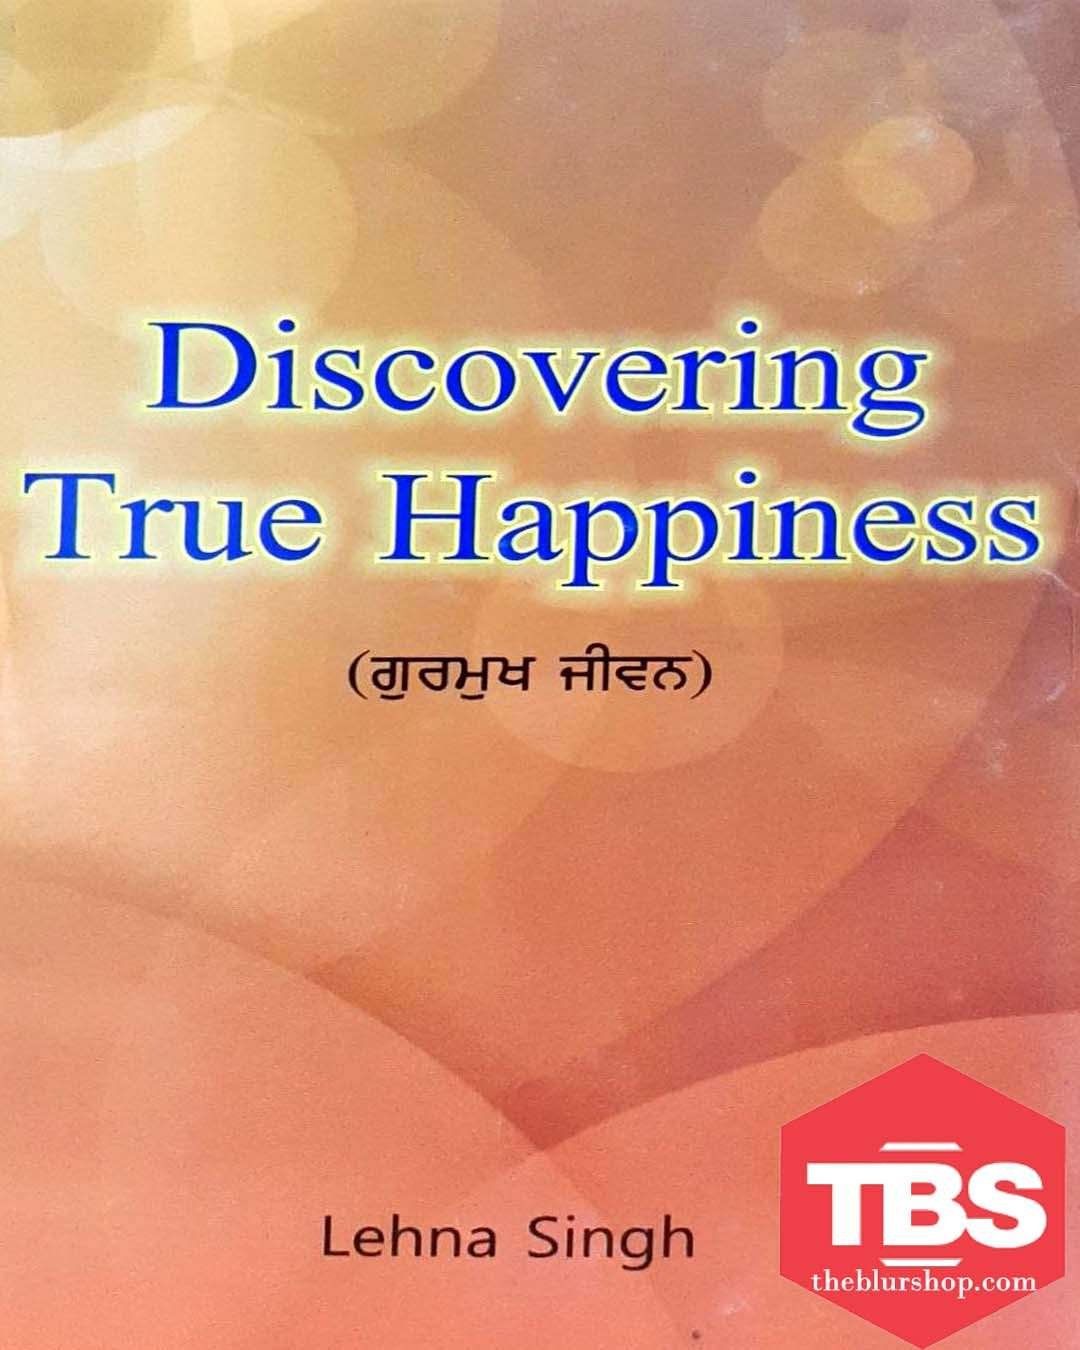 Discovering True Happiness